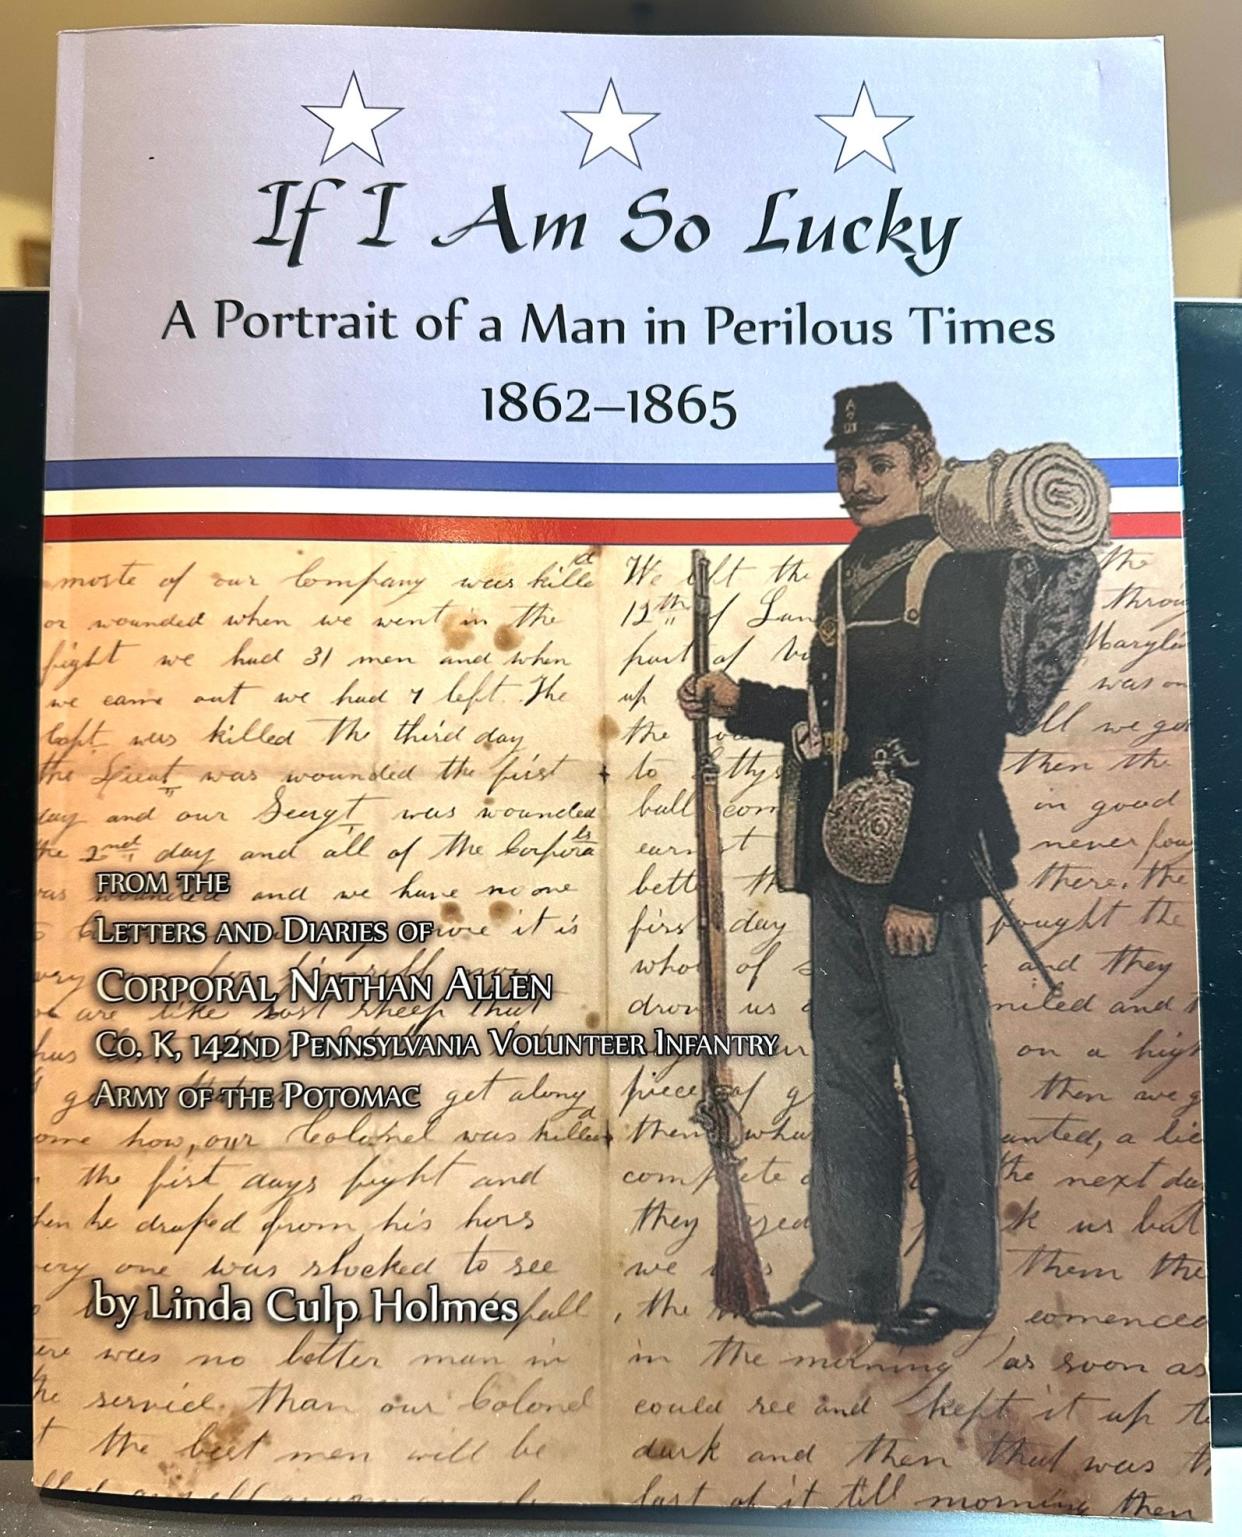 "If I Am So Lucky" is the book by Linda Holmes that tells the story of her great-great uncle, Nathan Allen, and his experiences in the Civil War